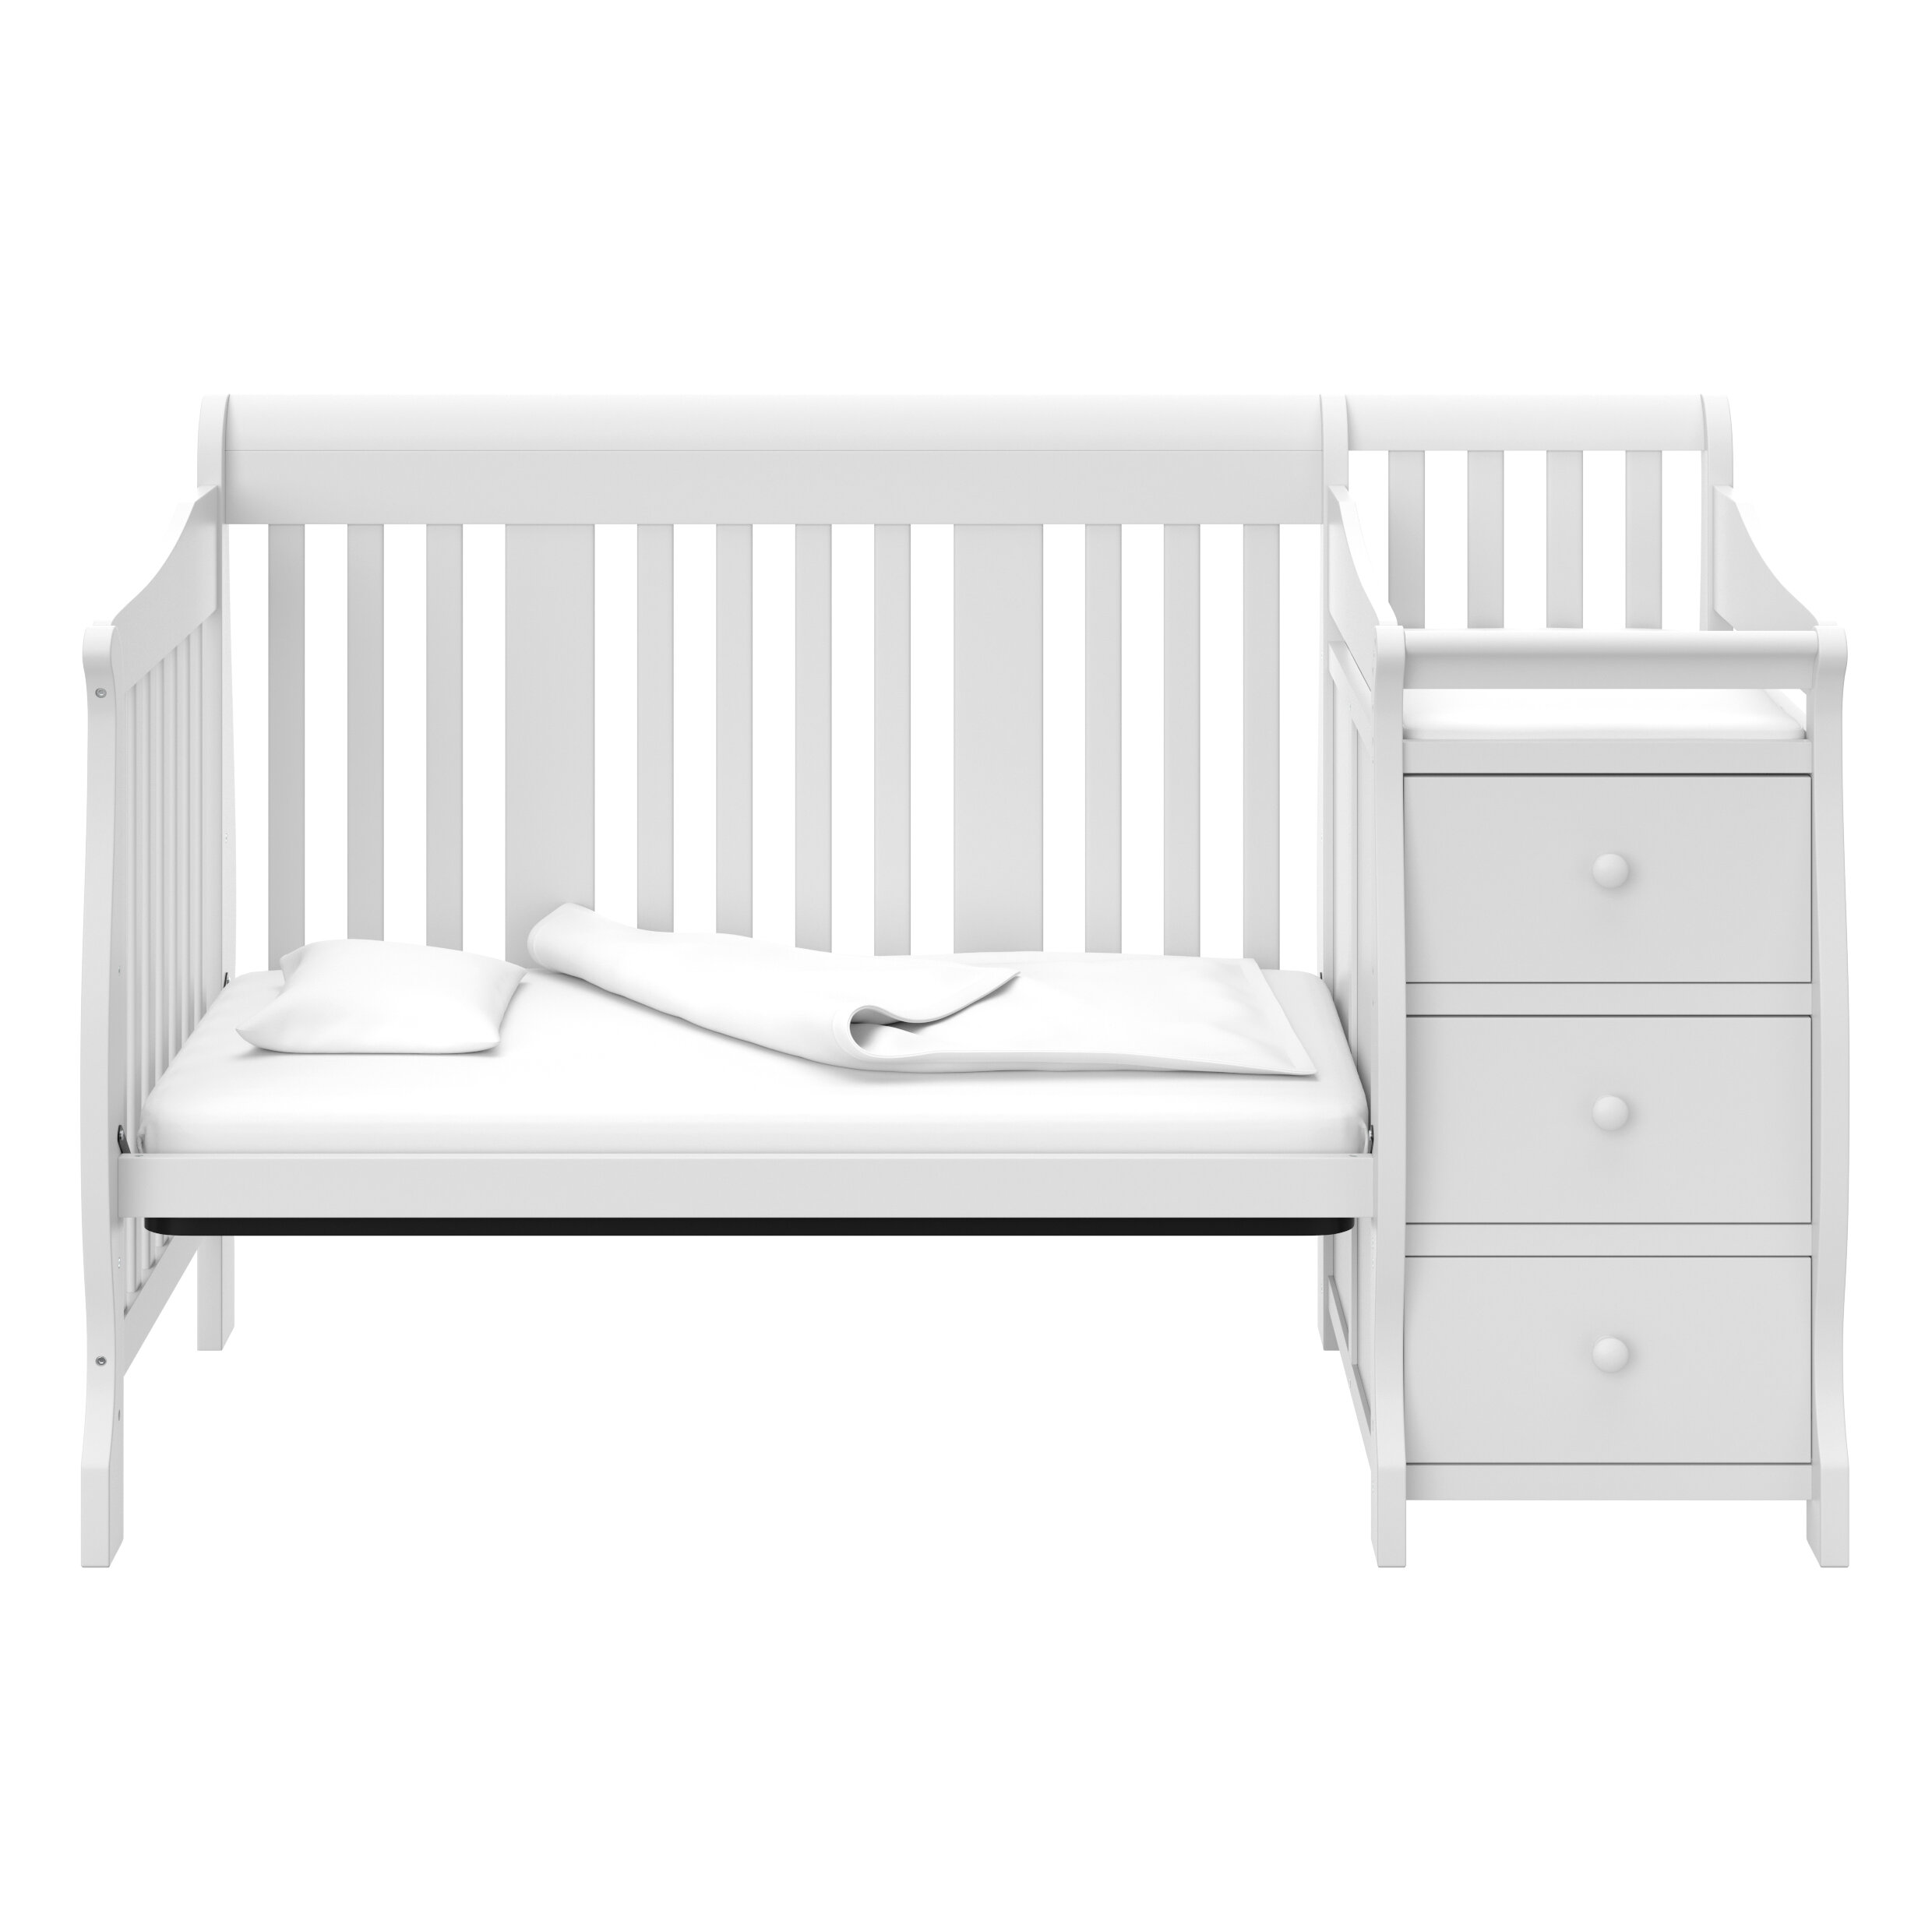 Mattress Not Included Pebble Gray Easily Converts to Toddler Bed Day Bed or Full Bed STORKCRAFT Portofino 4 in 1 Fixed Side Convertible Crib Changer Three Position Adjustable Height Mattress 